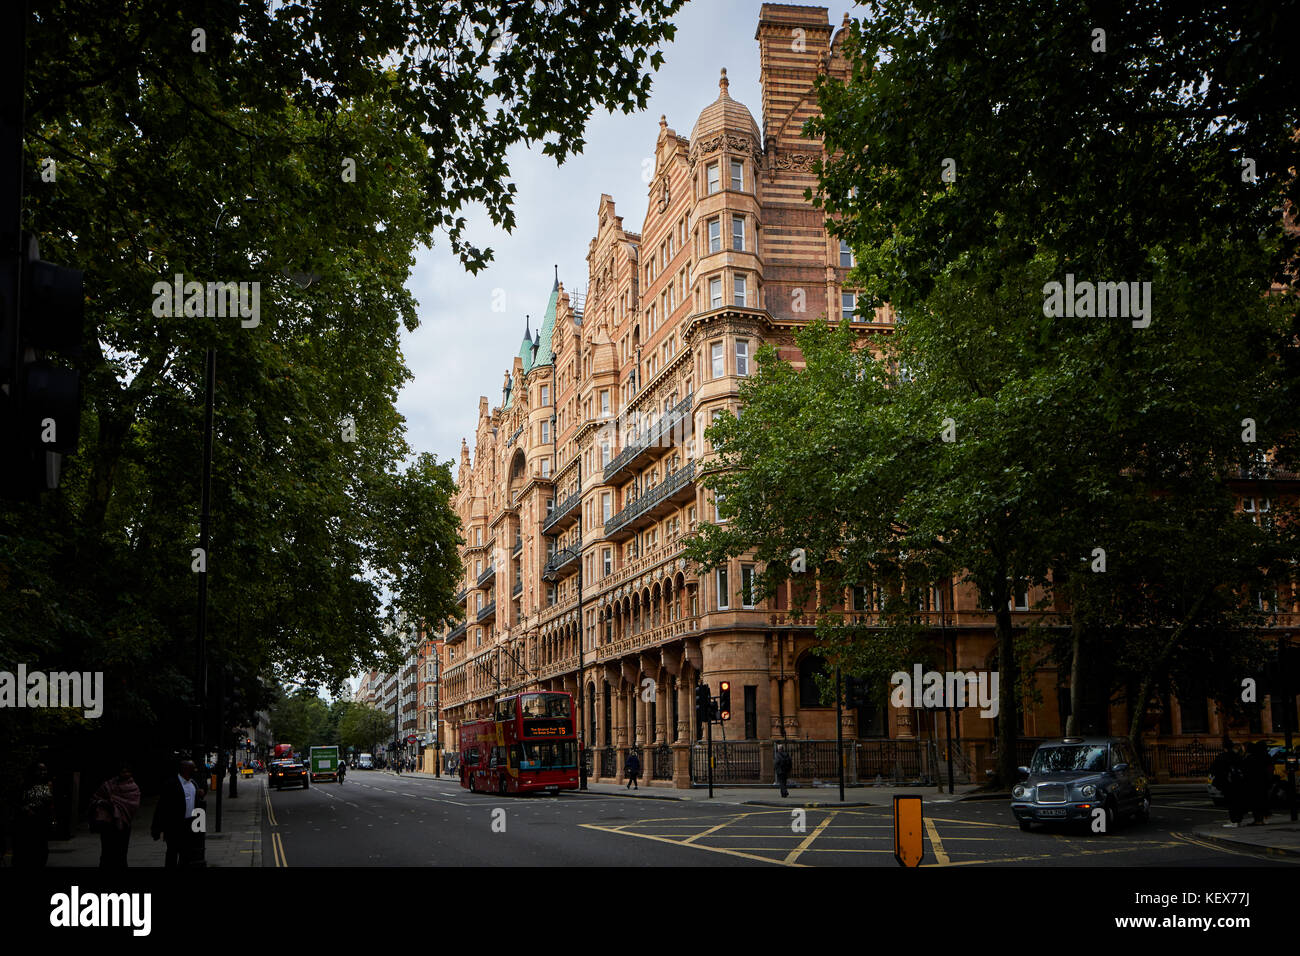 The Principal London formerly kn Hotel Russell, is a five-star hotel, located on Russell Square by architect Charles Fitzroy Doll in London the capita Stock Photo